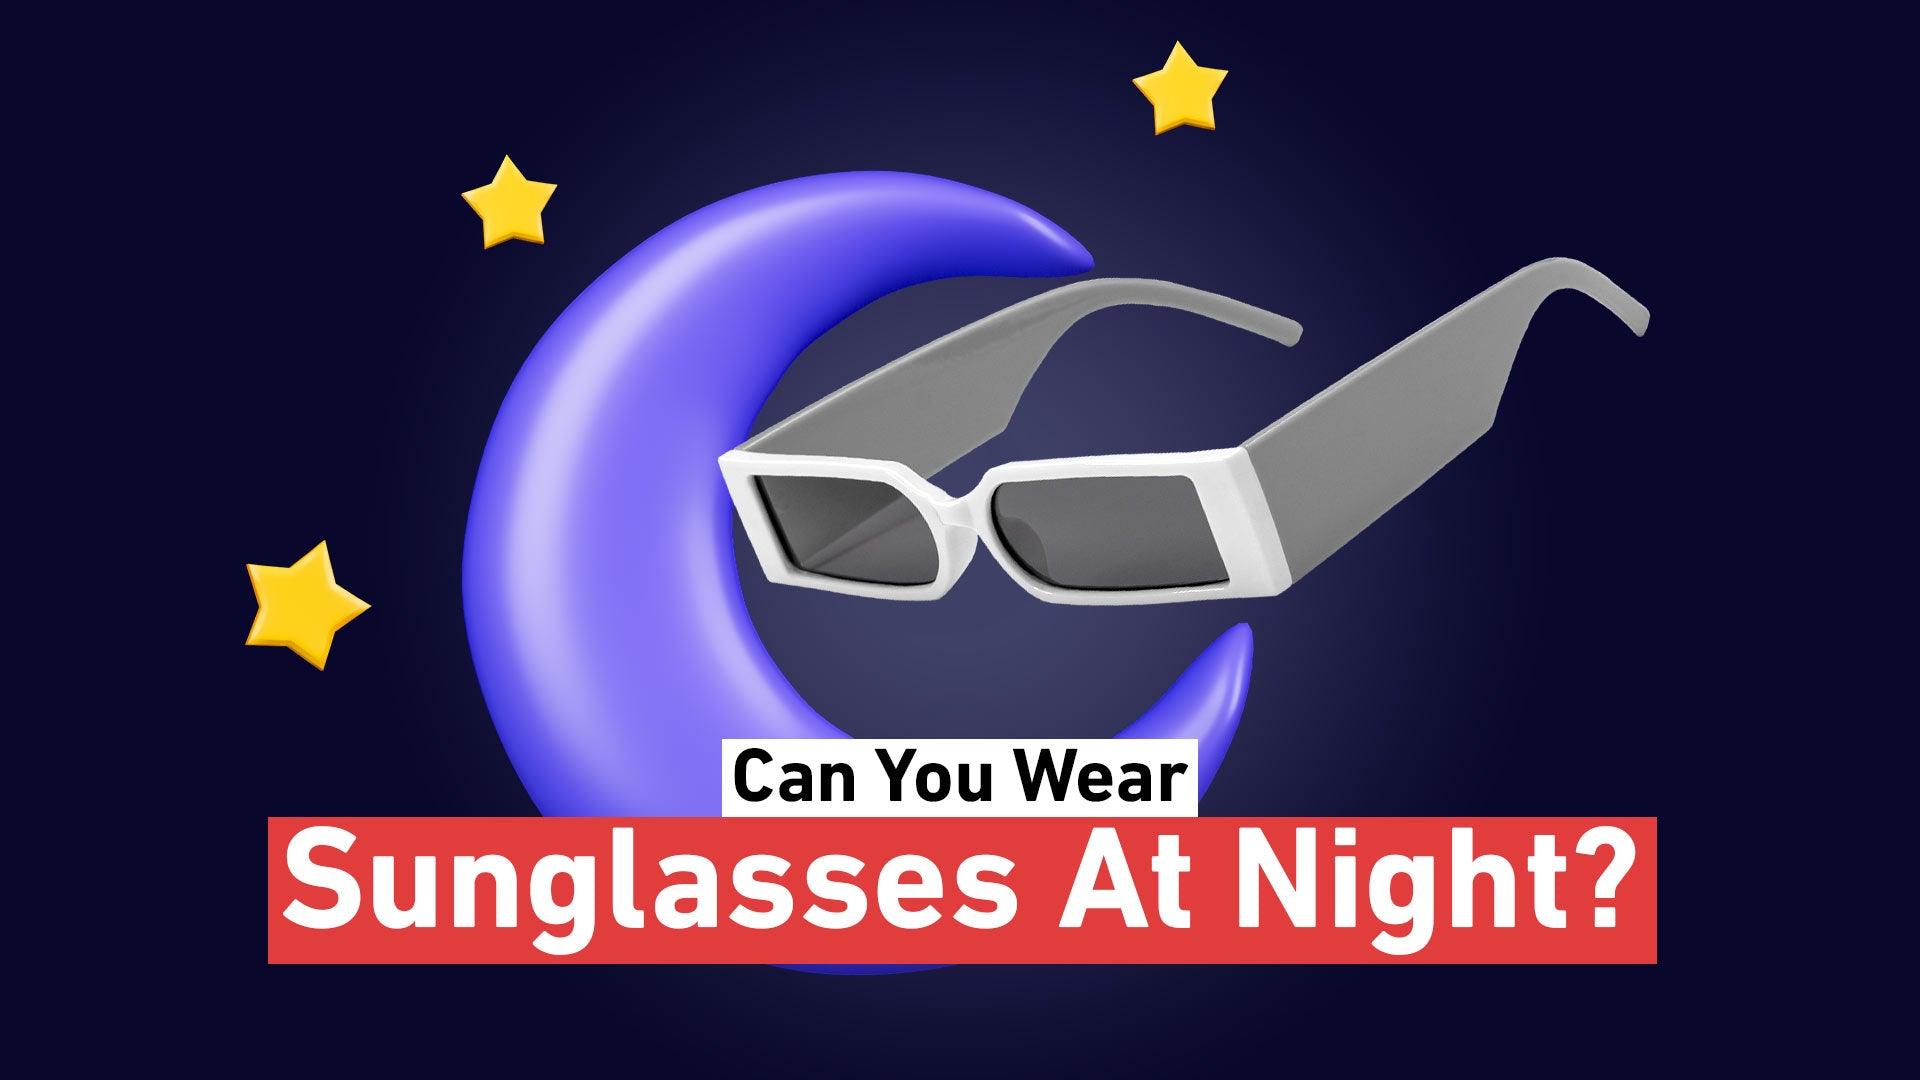 Can You Wear Sunglasses At Night?